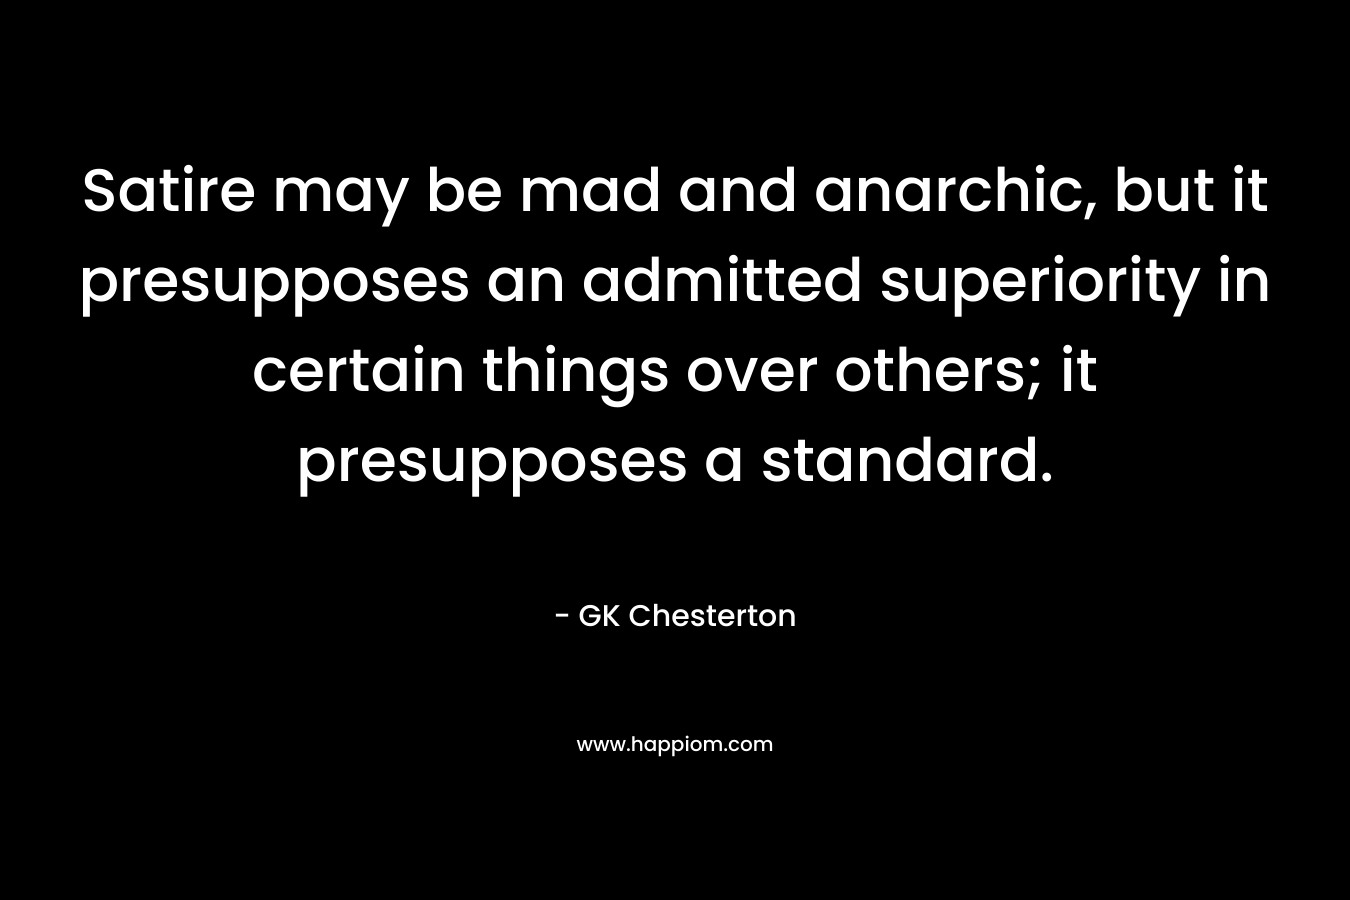 Satire may be mad and anarchic, but it presupposes an admitted superiority in certain things over others; it presupposes a standard.